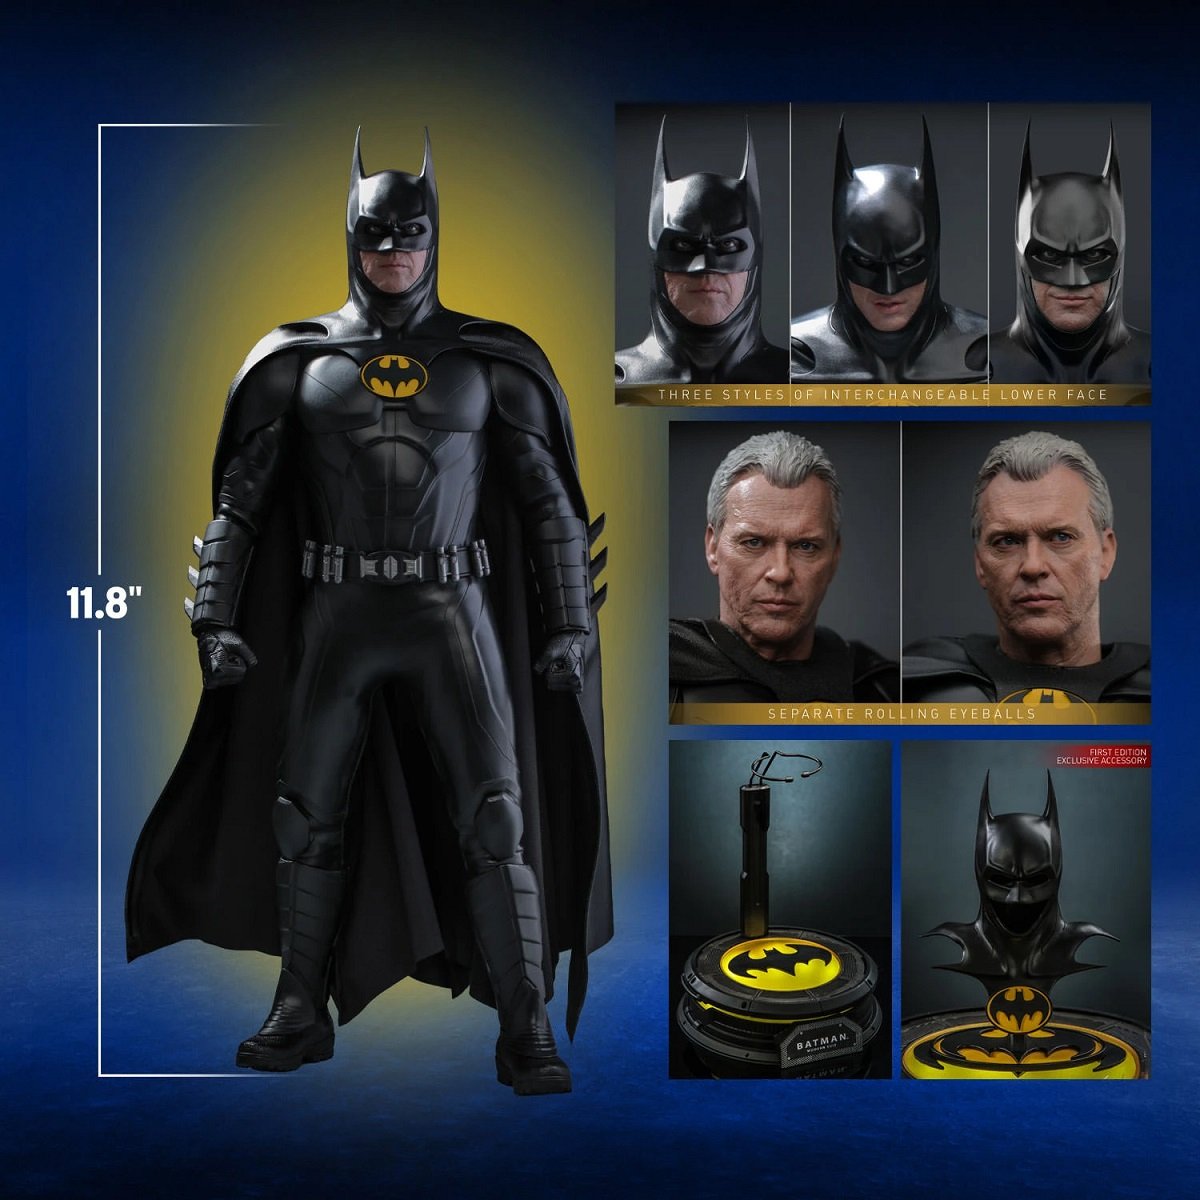 Hot Toys Michael Keaton Batman from The Flash in various poses.